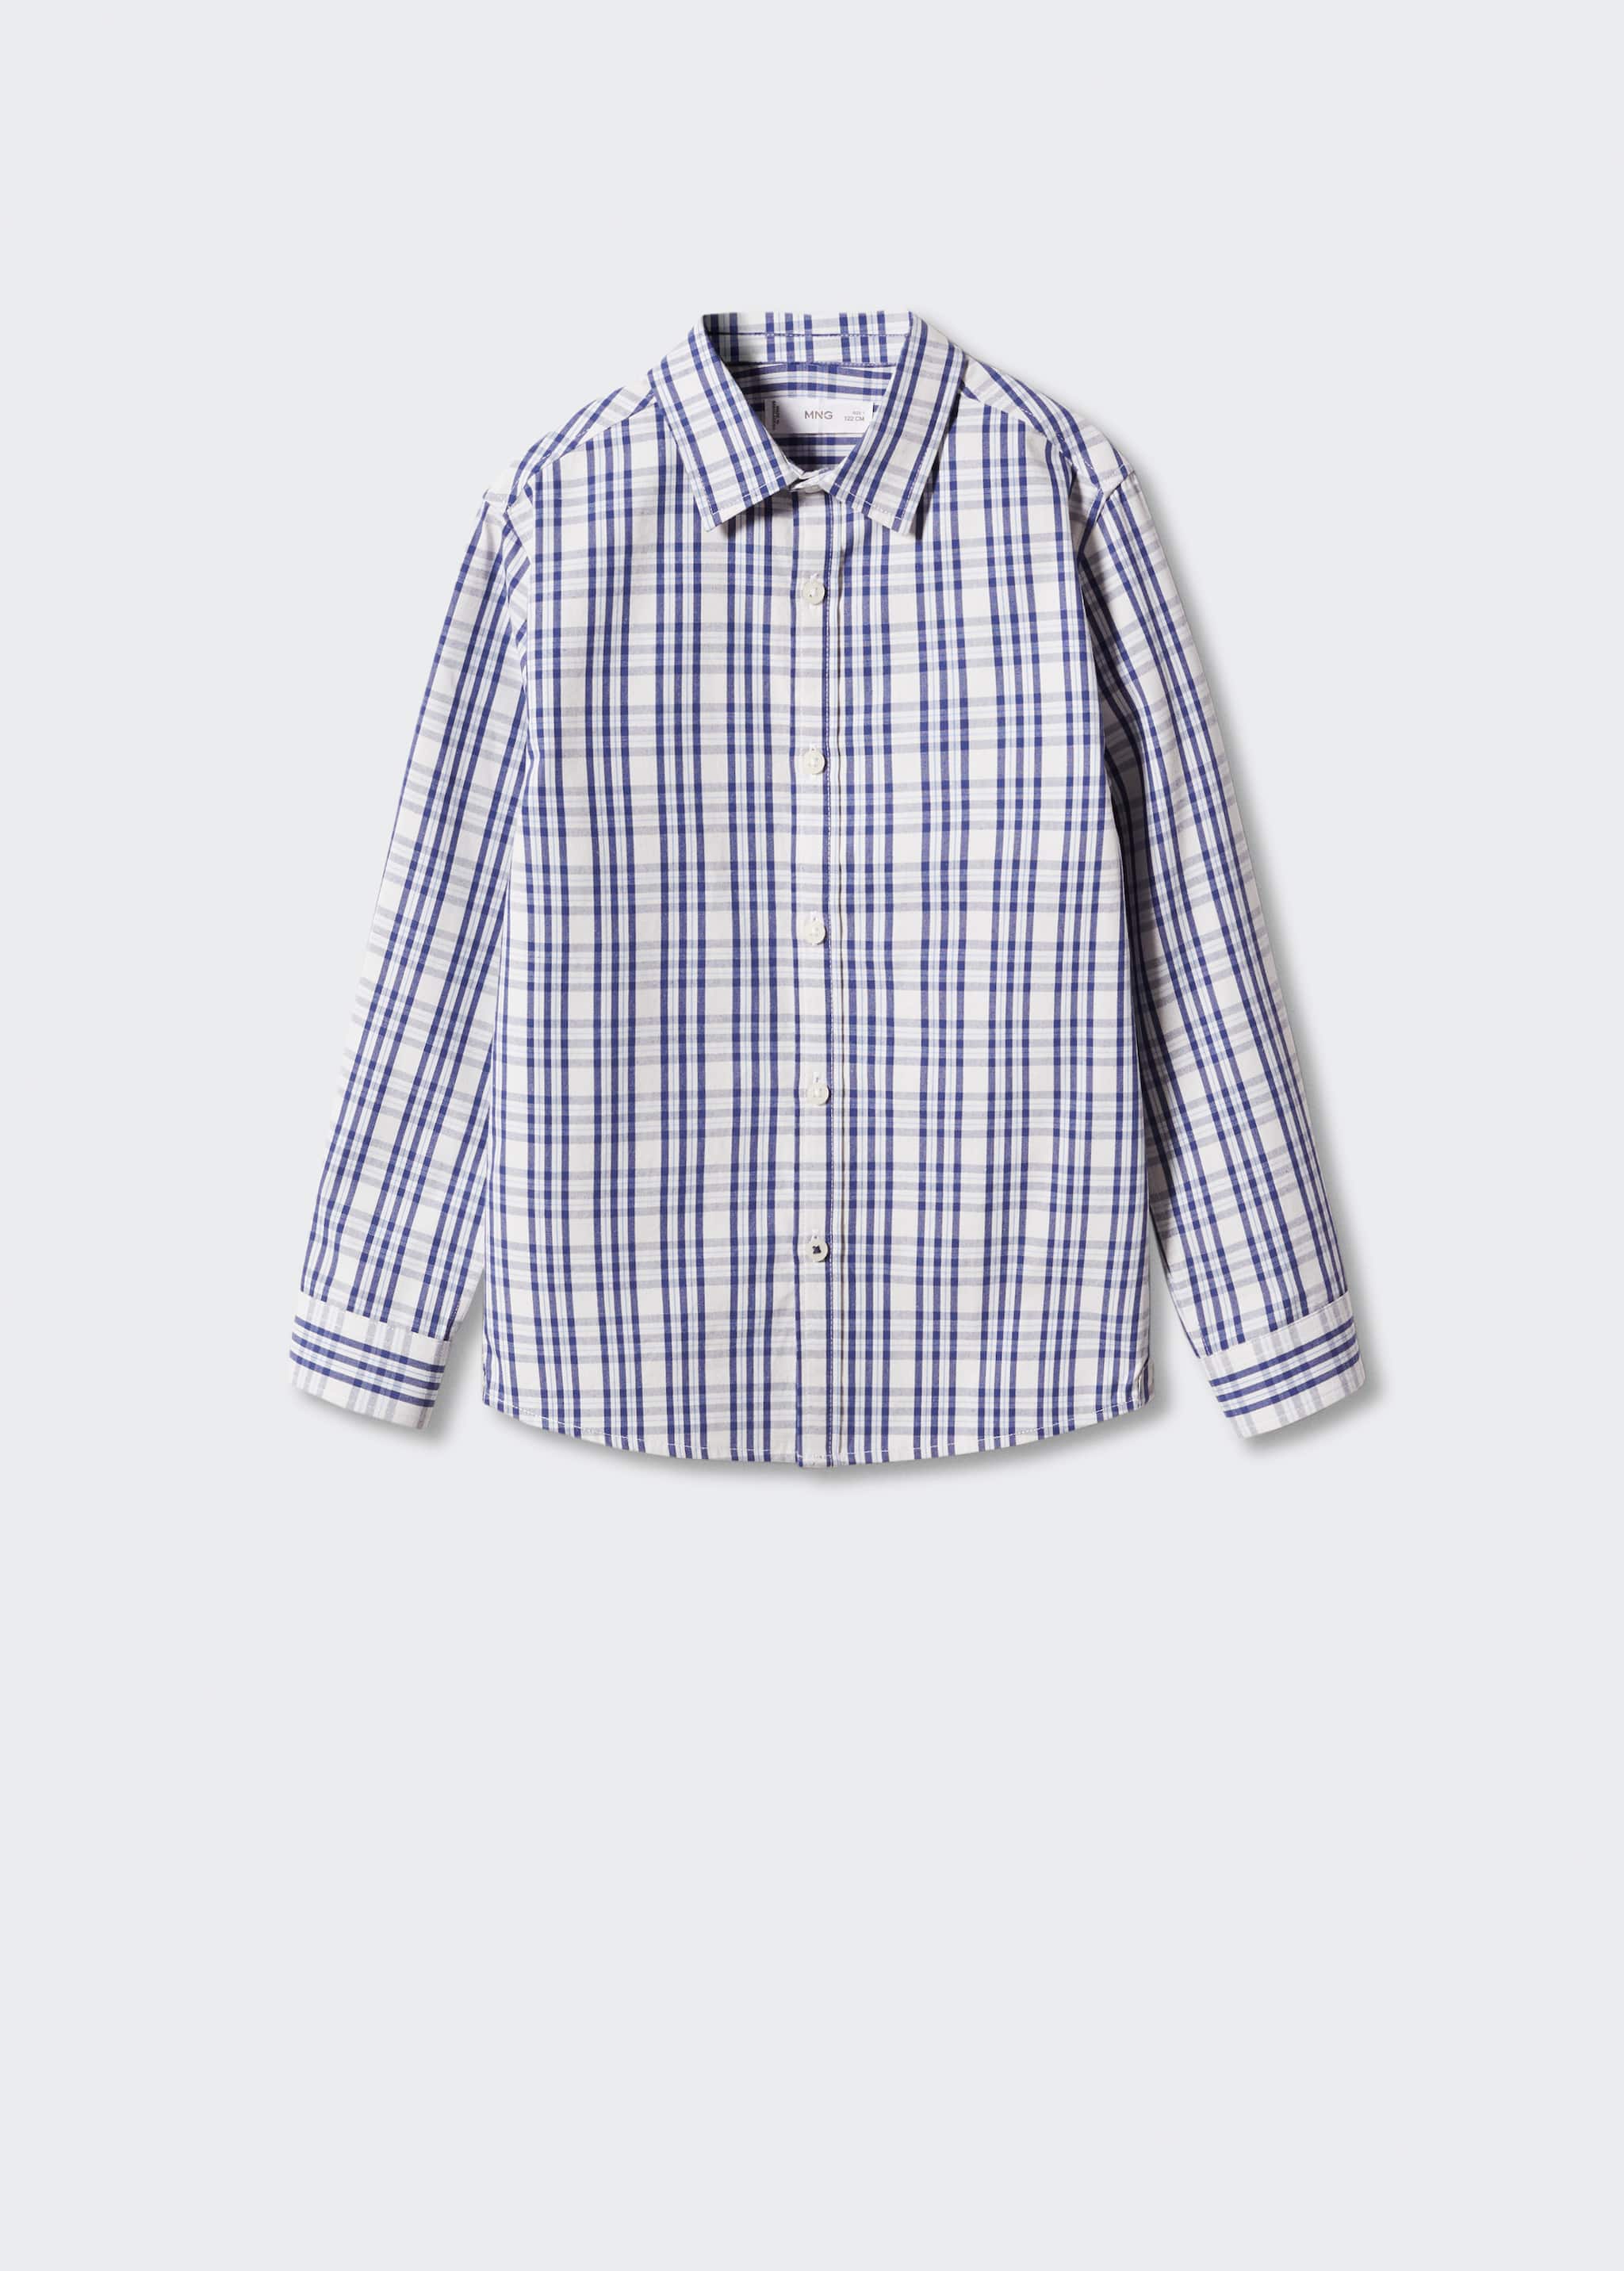 Checked print shirt - Article without model